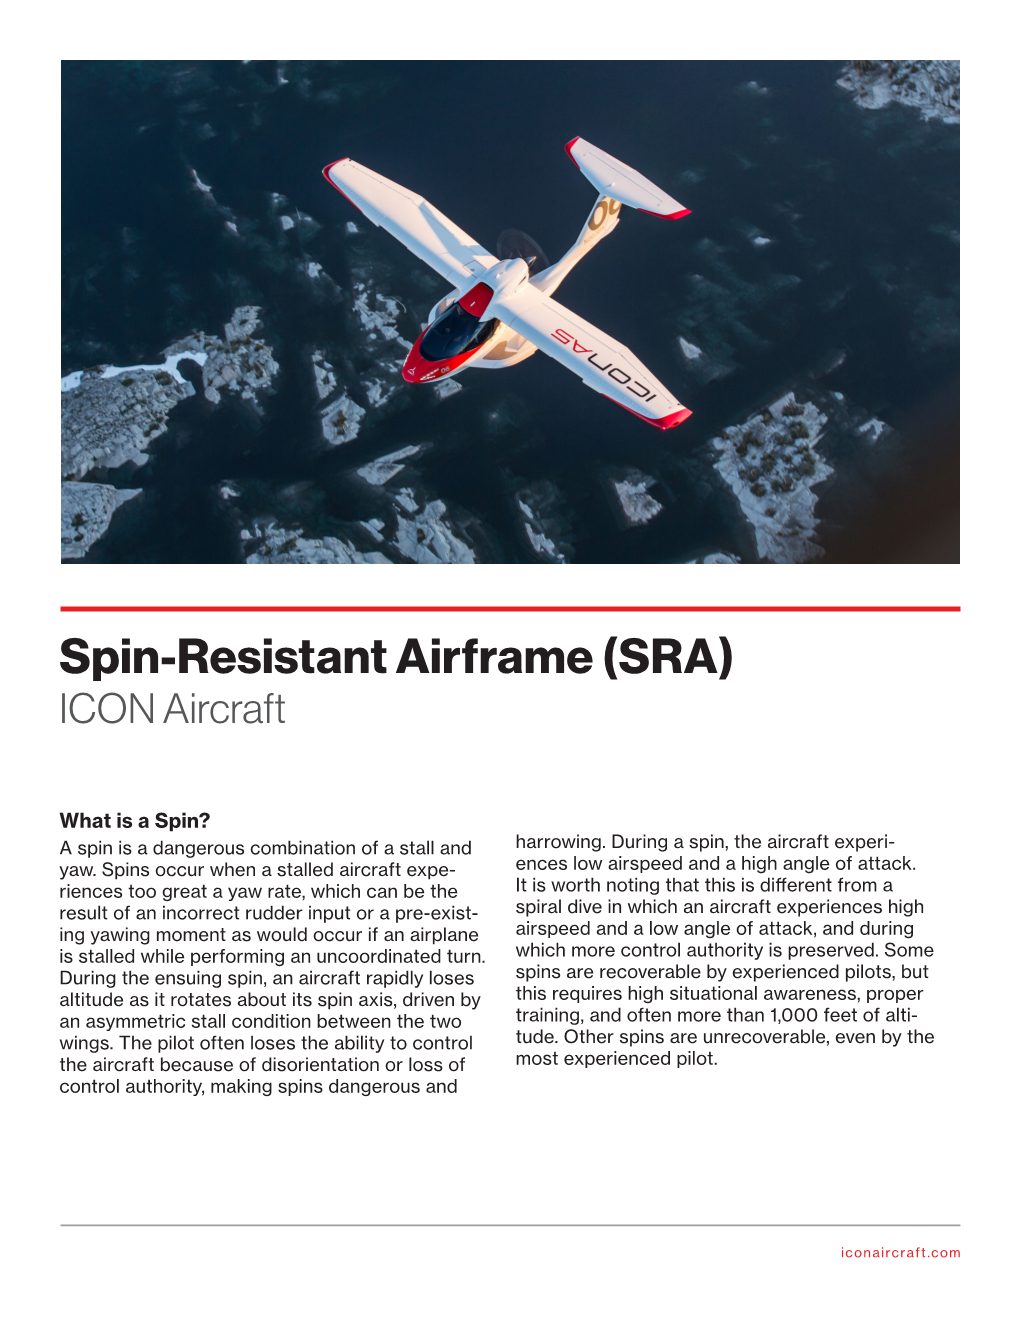 Spin-Resistant Airframe (SRA) ICON Aircraft